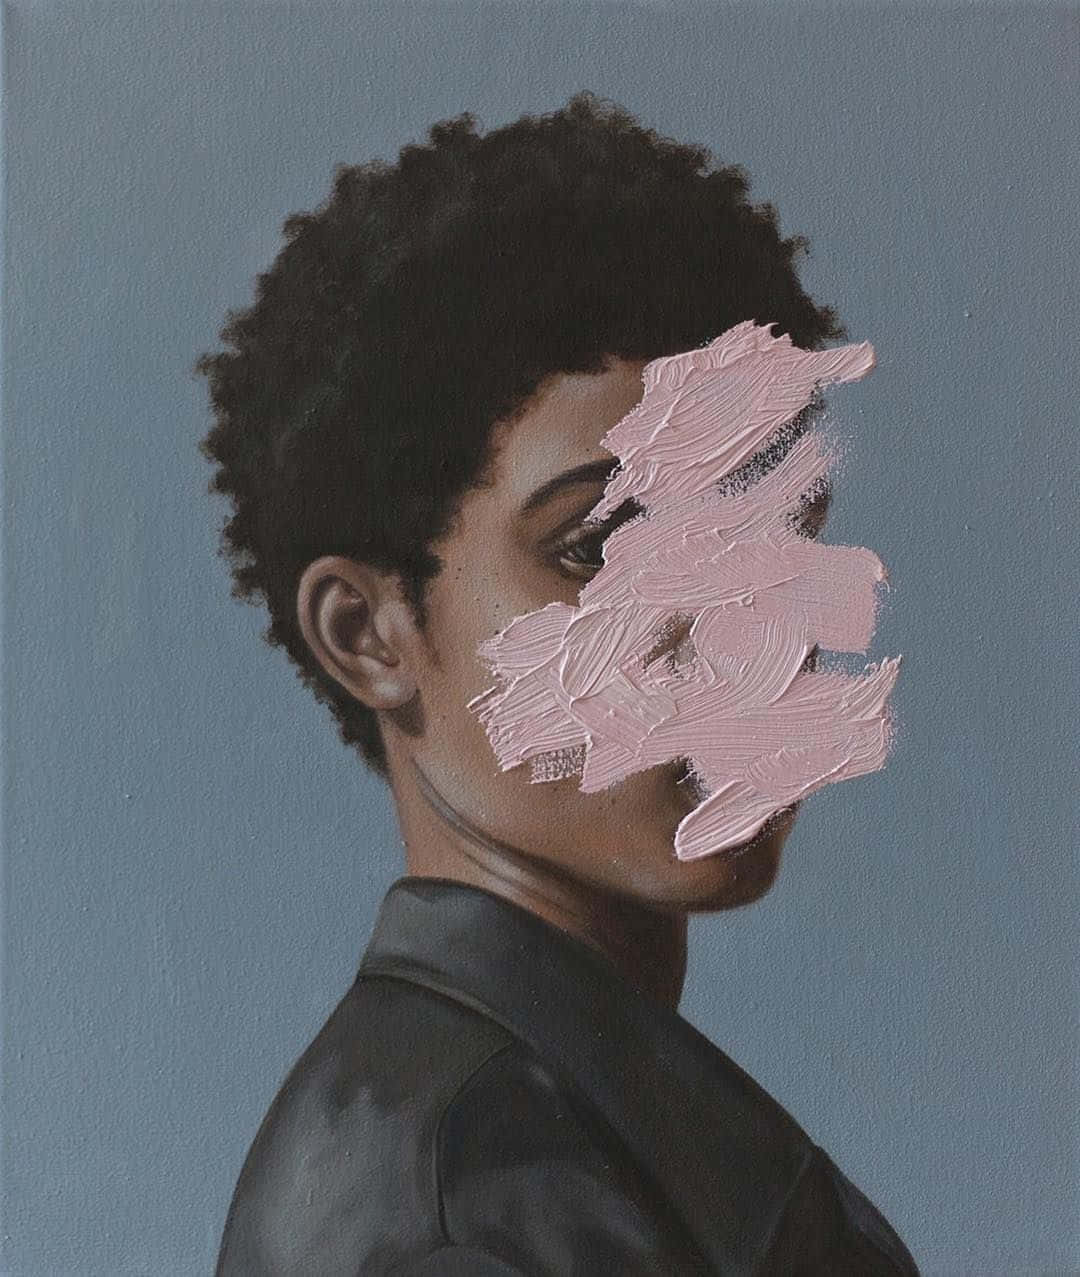 A Painting Of A Black Man With Pink Paint On His Face